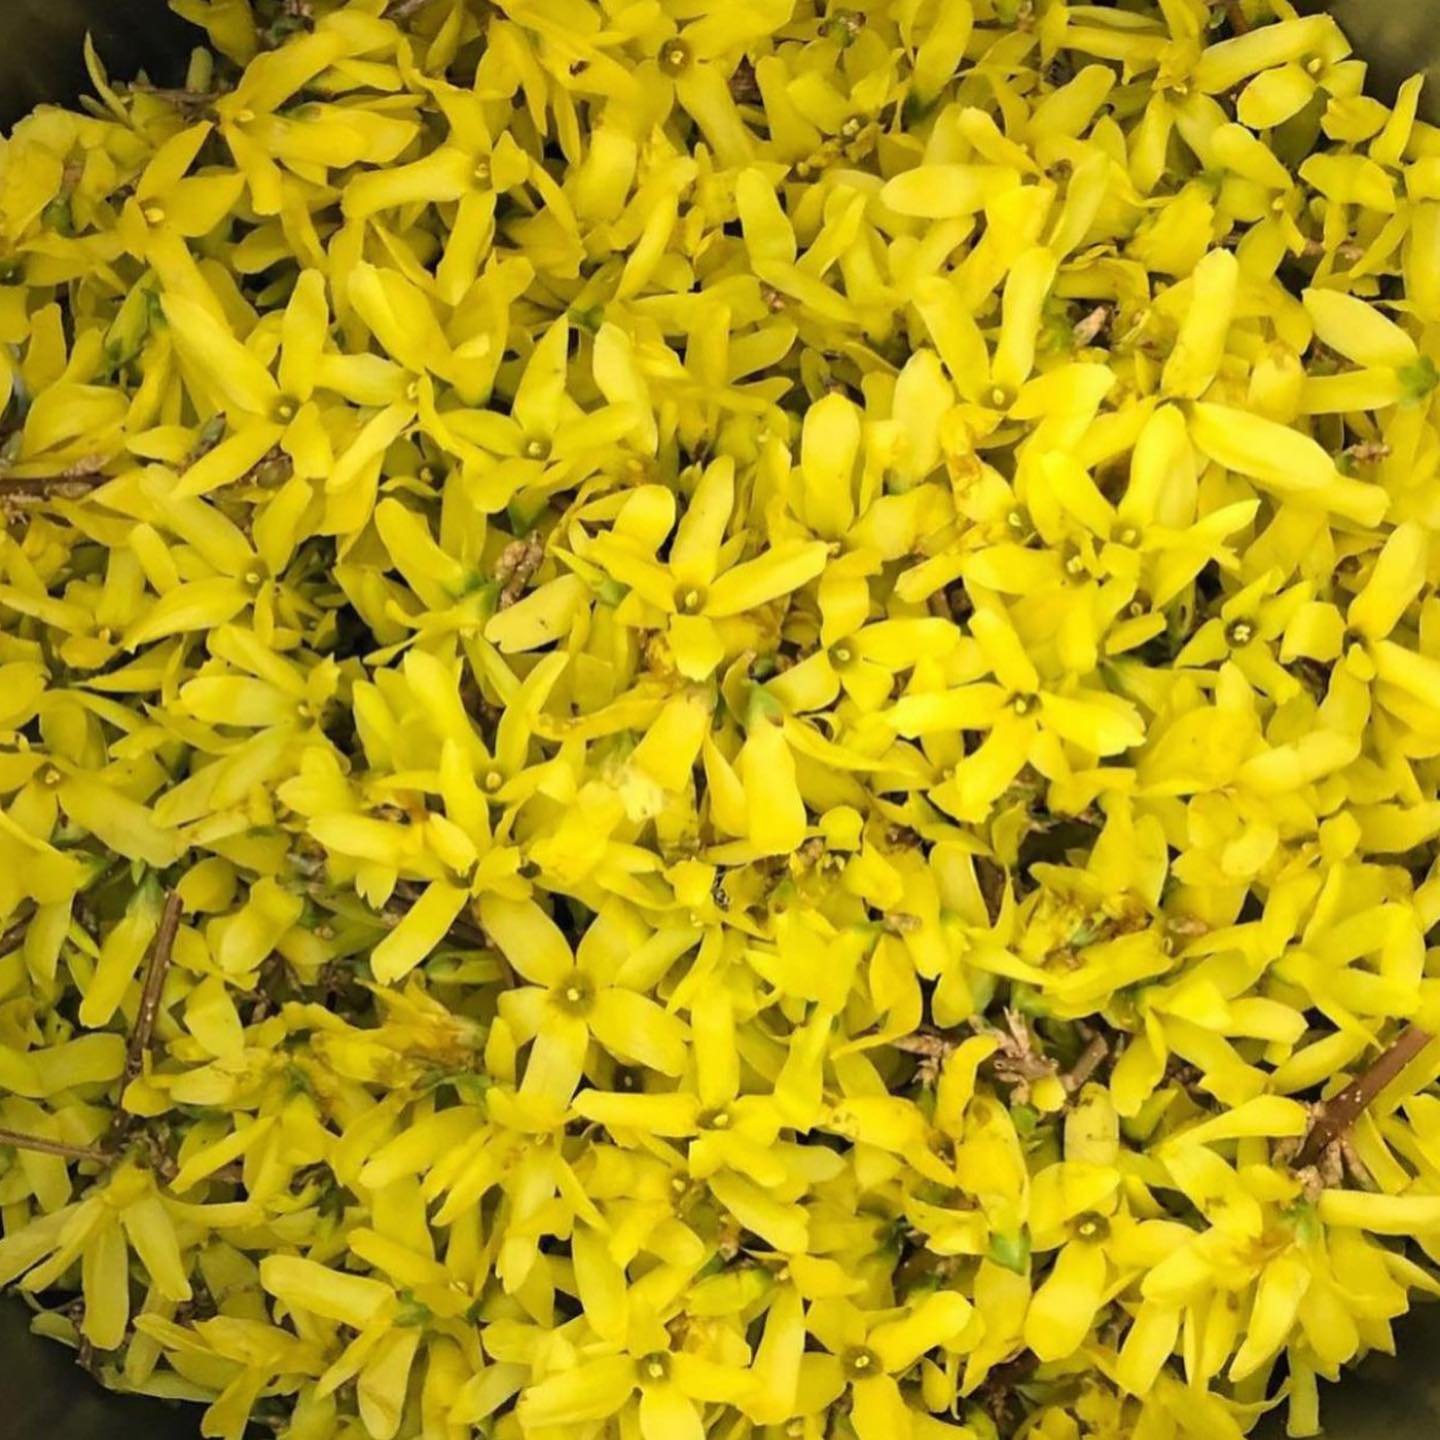 Nothing says it&rsquo;s Springtime like the bright yellow blossoms of forsythia! We added the flowers and stems to our dye pot and a few skeins of our River Yarn. Swipe to see the results.
.
.
.
.
.
. 
.
.
.
#naturaldye #naturaldyer #naturaldyes  #na